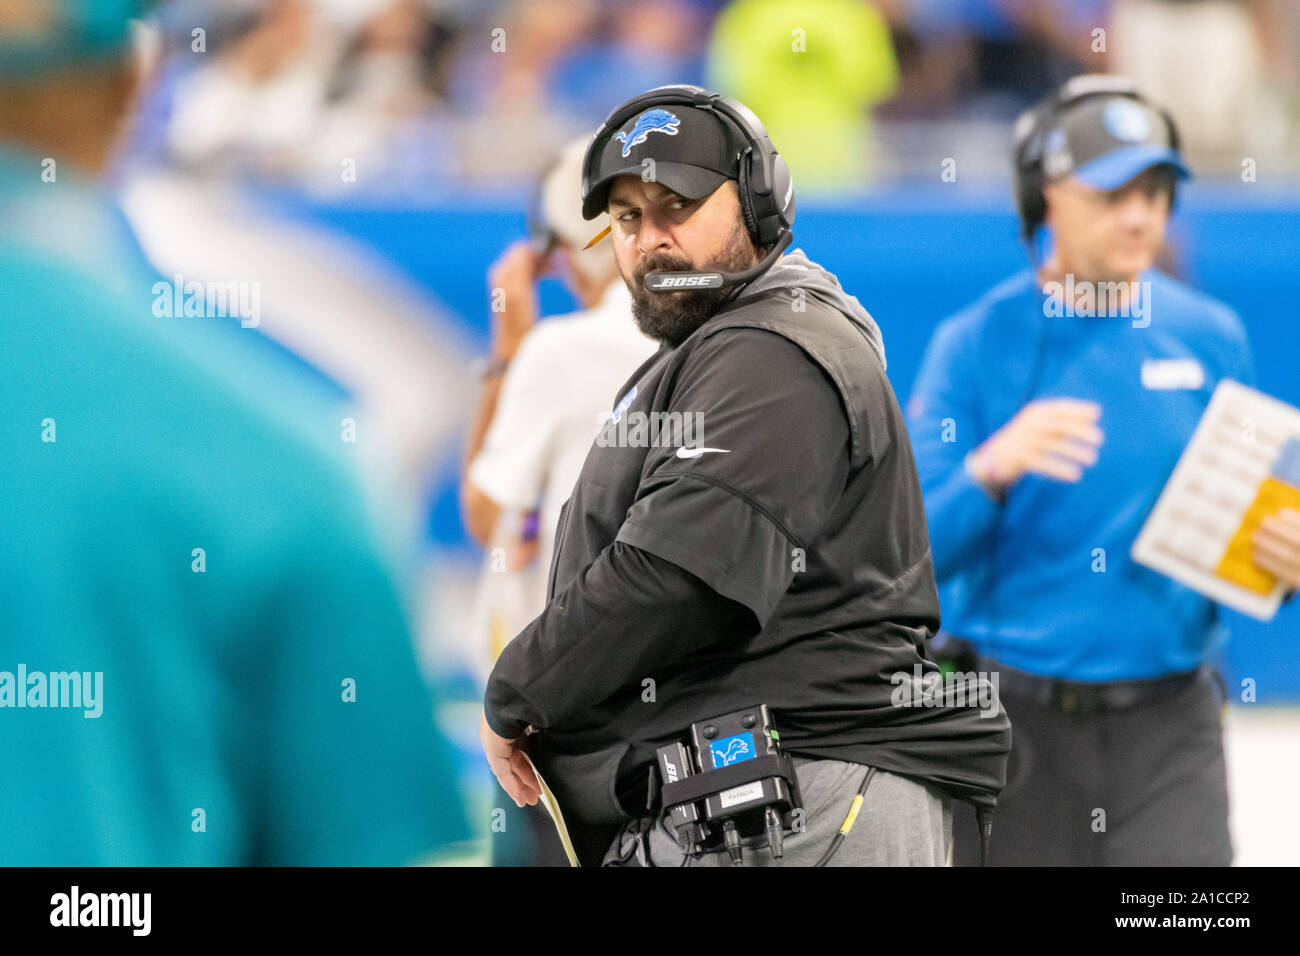 DETROIT, MI - SEPTEMBER 15: Detroit Lions head coach Matt Patricia on the sideline gives a look to the bench during NFL game between Los Angeles Chargers and Detroit Lions on September 15, 2019 at Ford Field in Detroit, MI (Photo by Allan Dranberg/Cal Sport Media) Stock Photo